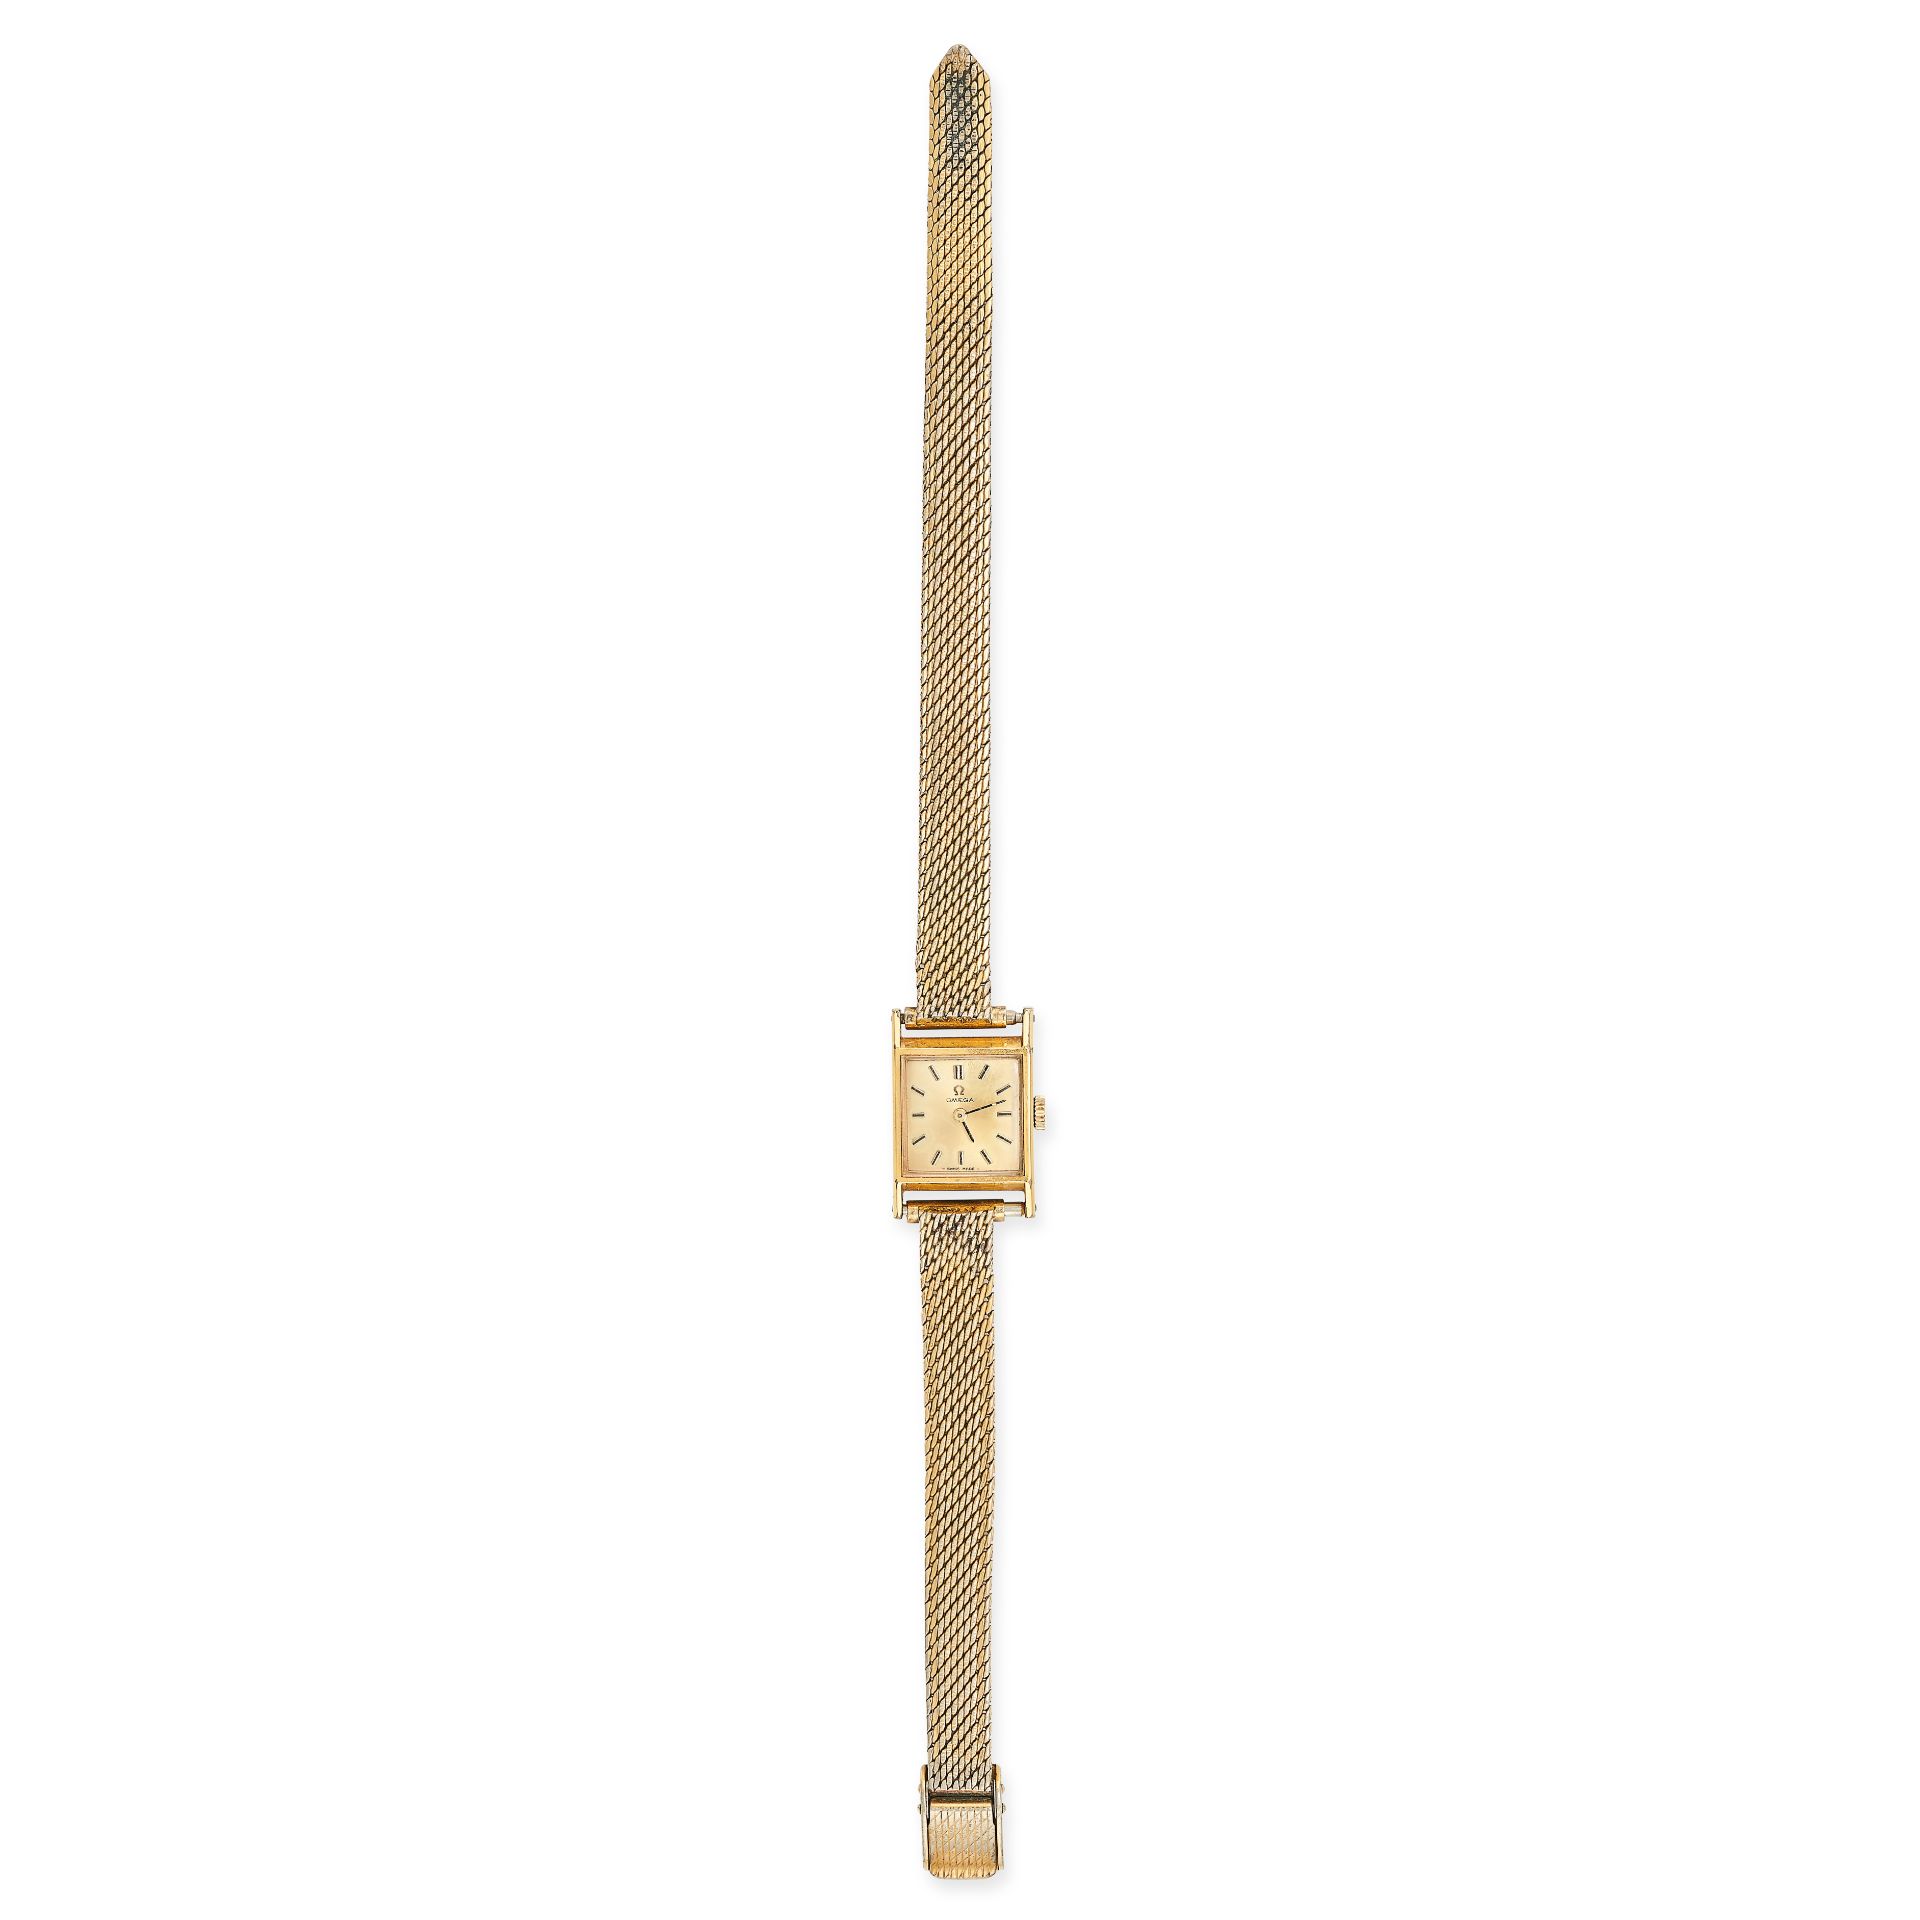 NO RESERVE - OMEGA, A LADIES DRESS WATCH in gold plate, with a gold silvered square dial, to a wo...